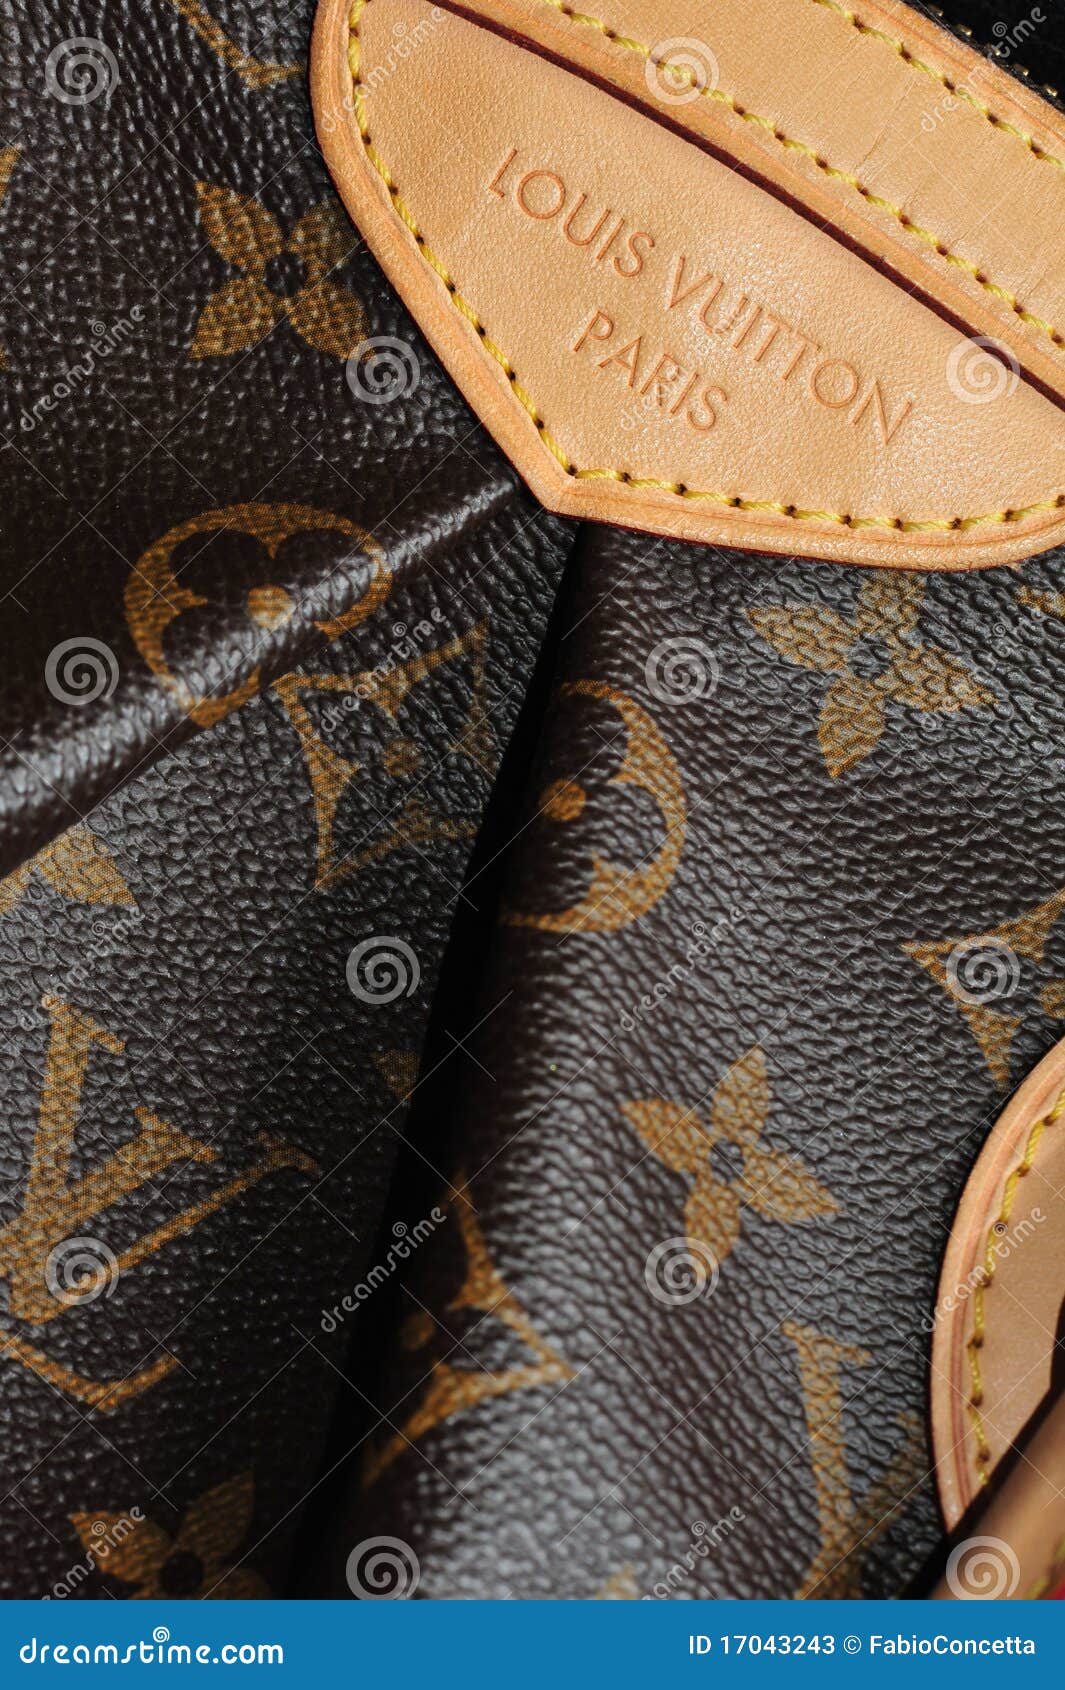 Louis Vuitton Symbols Leather Background Stock Photo, Picture and Royalty  Free Image. Image 167767267.